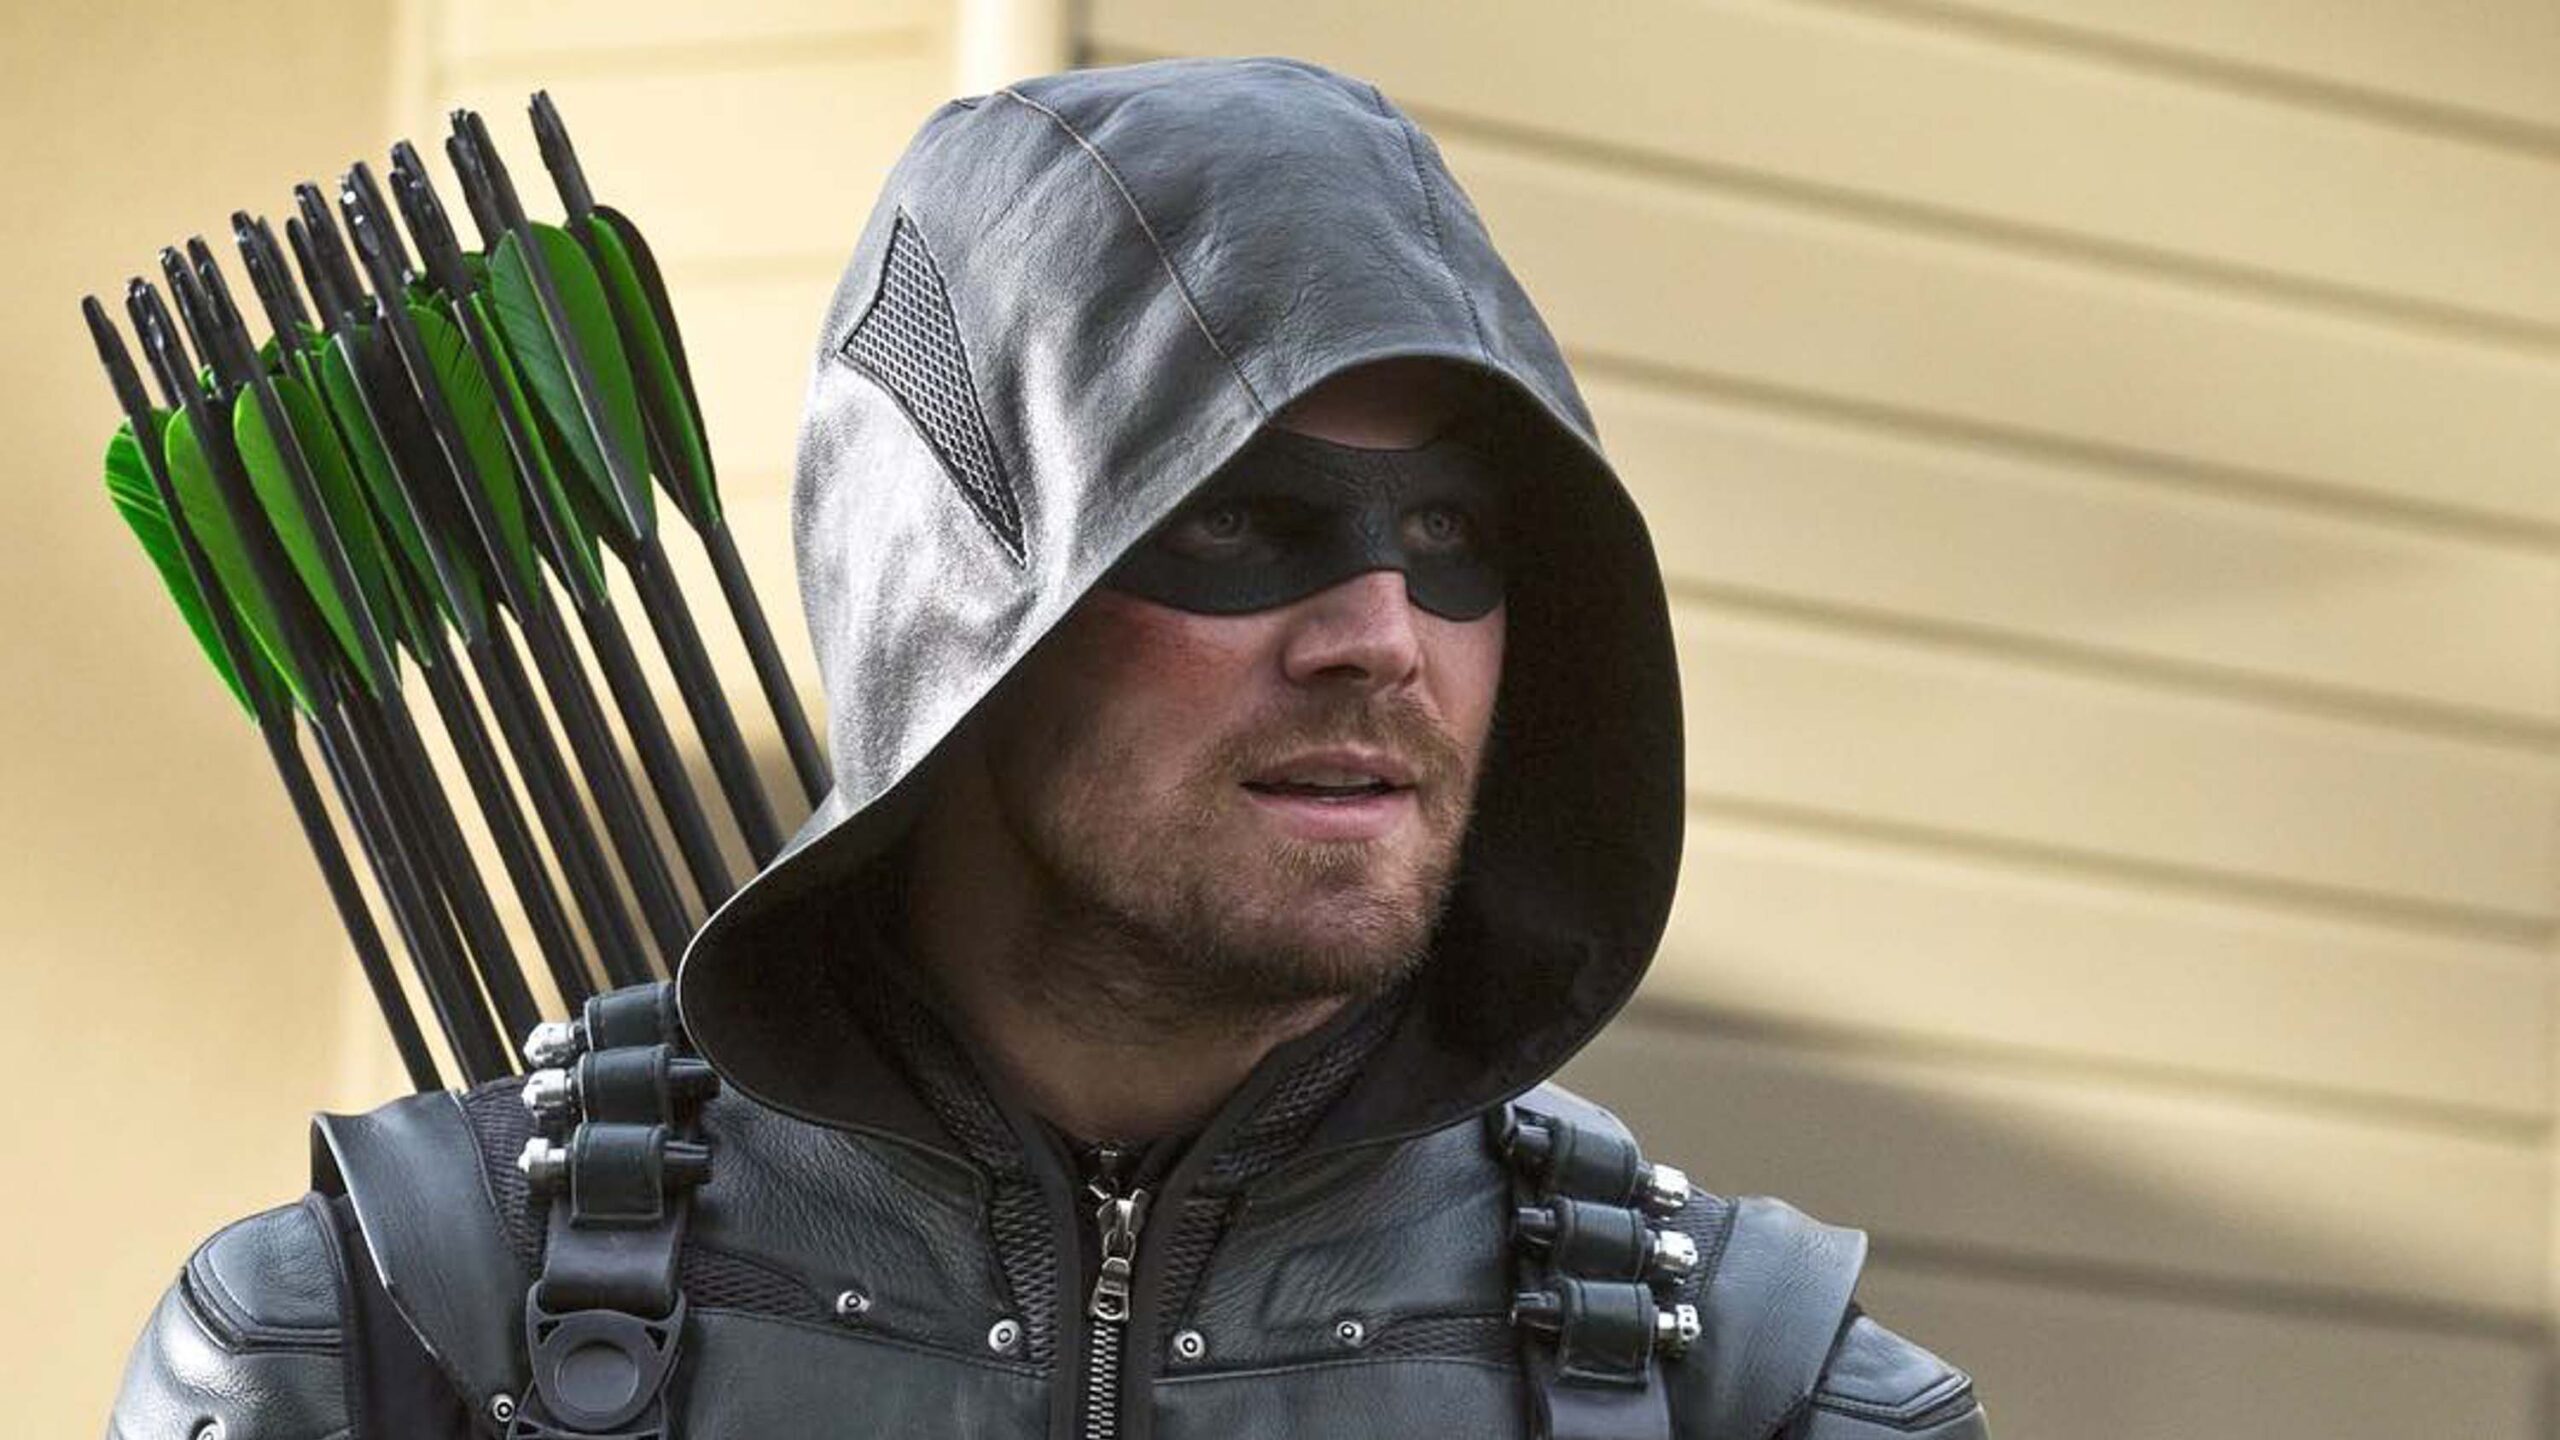 GMA executive, Stephen Amell comment on ‘Alyas Robin Hood’